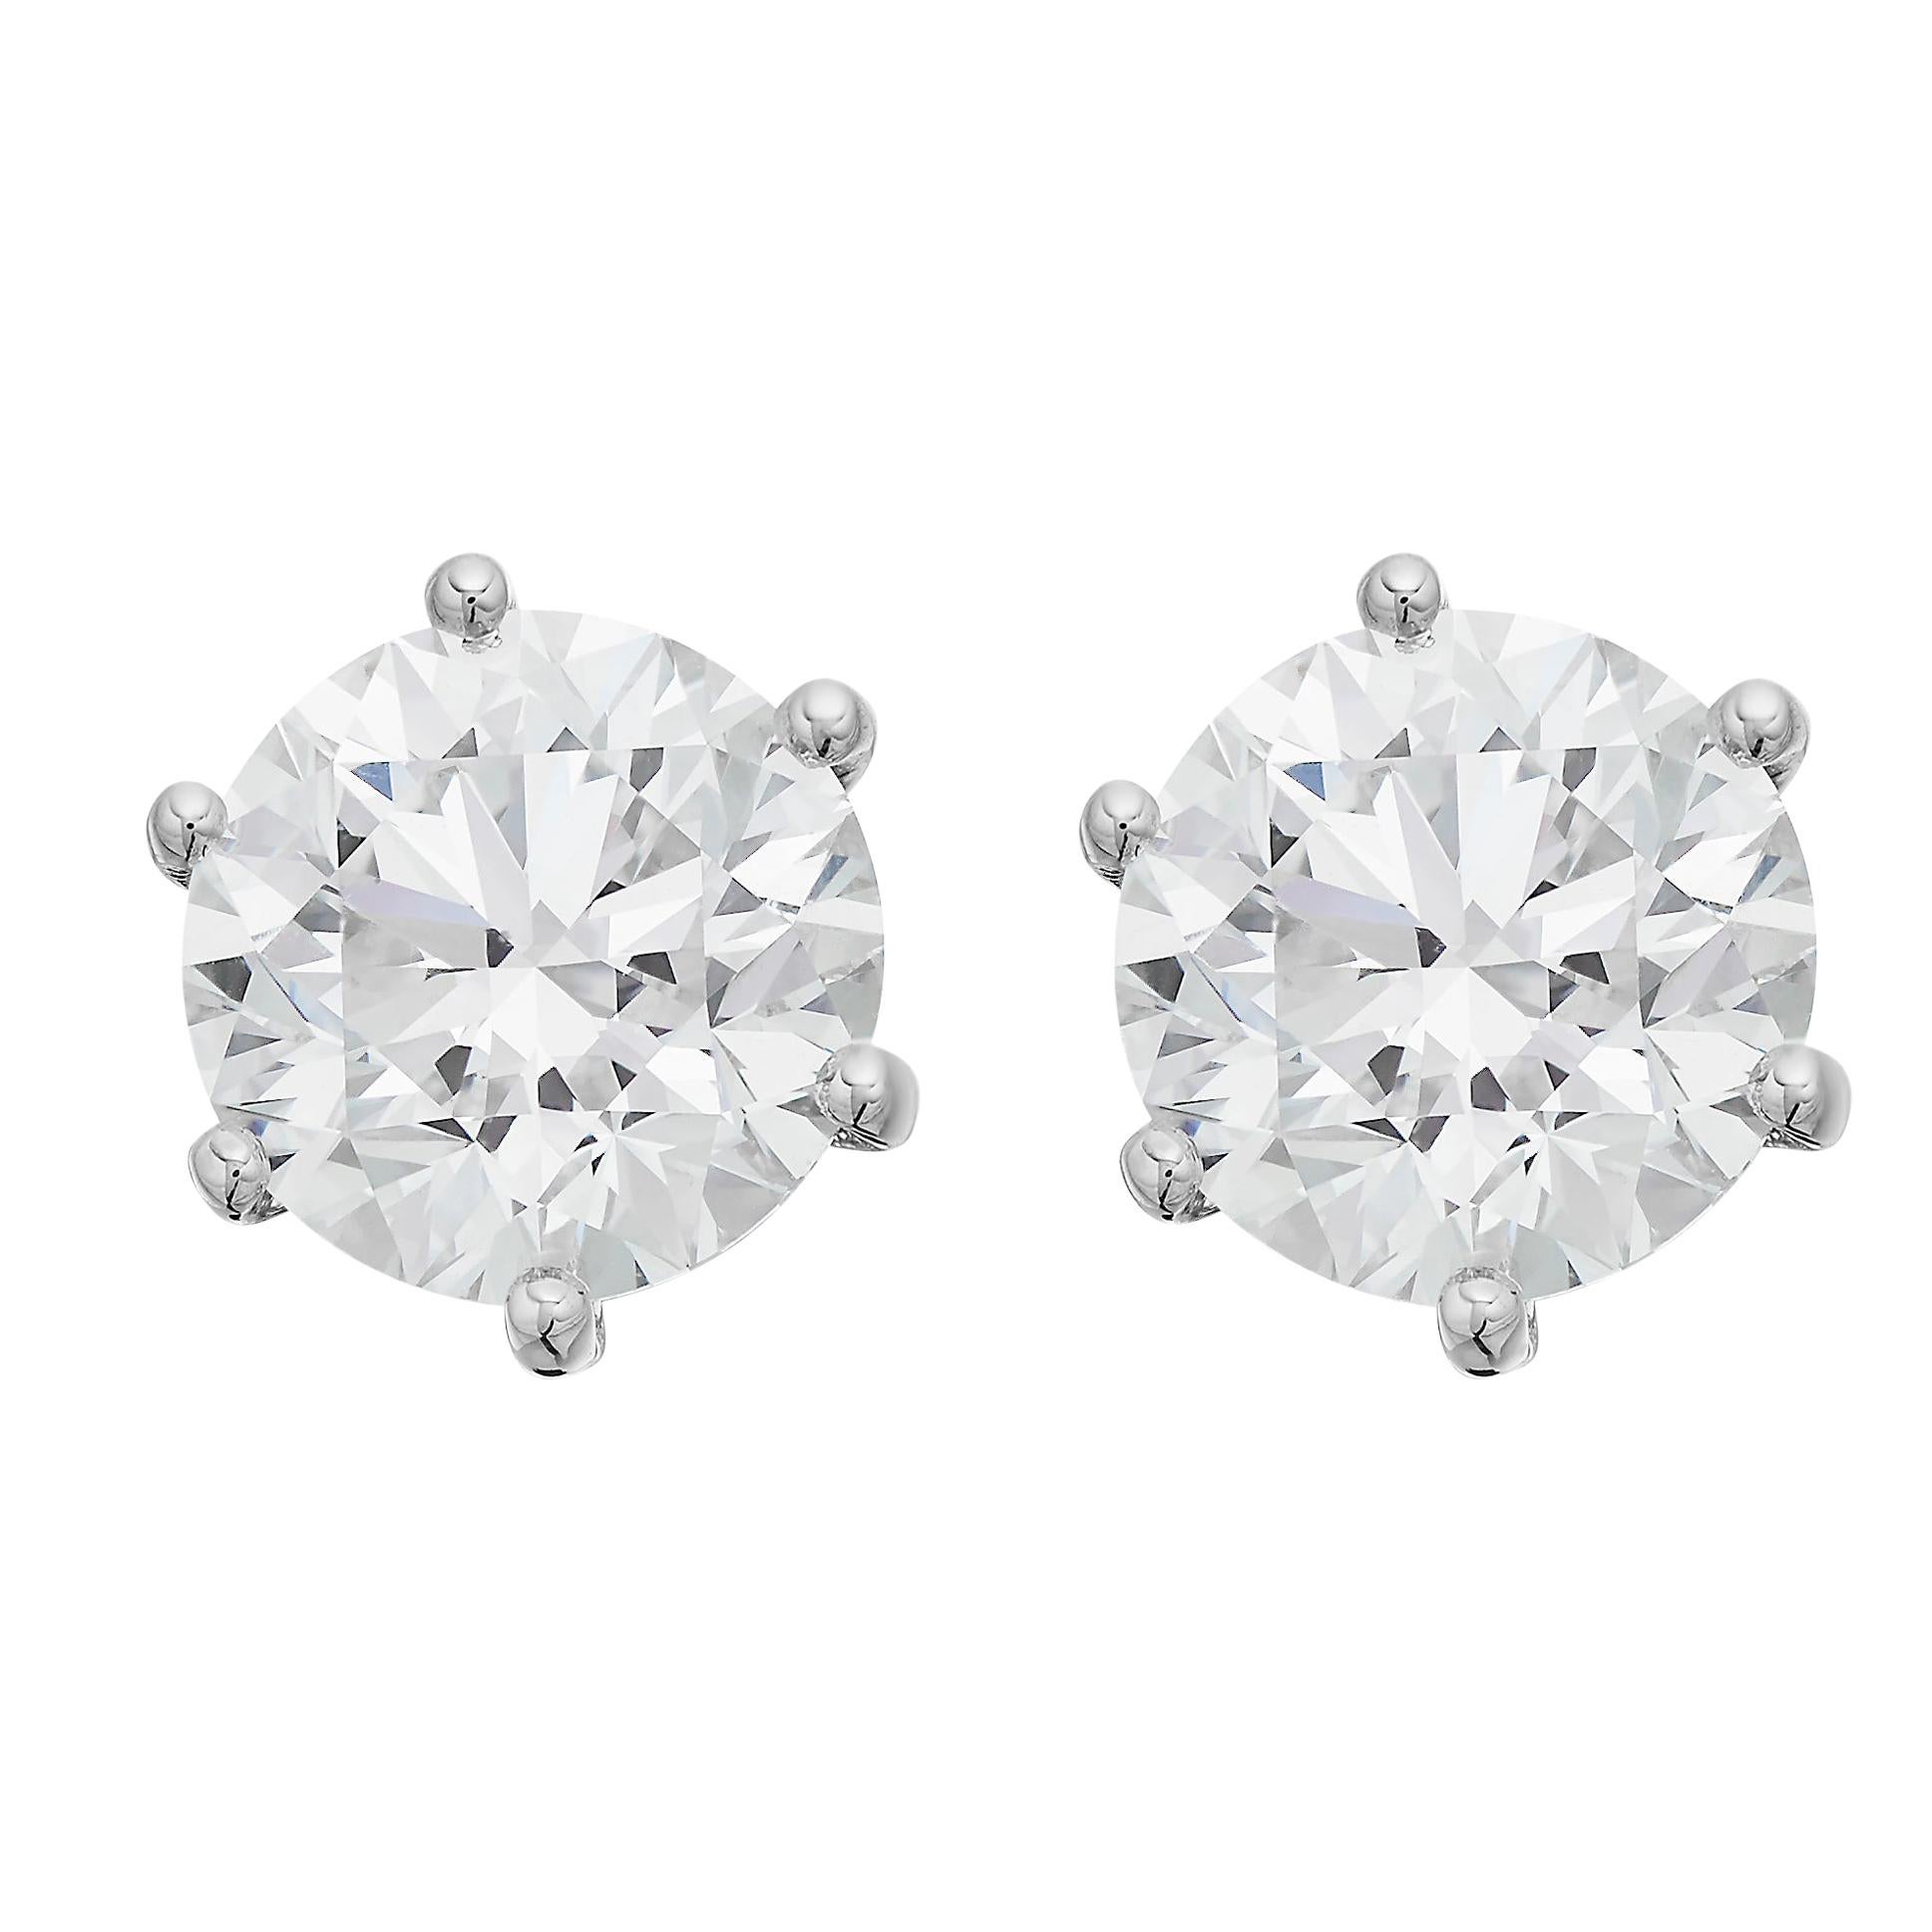 Round Cut GIA Certified 2.03 & 2.01 ct F VS2 Handmade Single Stone Solitaire Stud Earrings For Sale